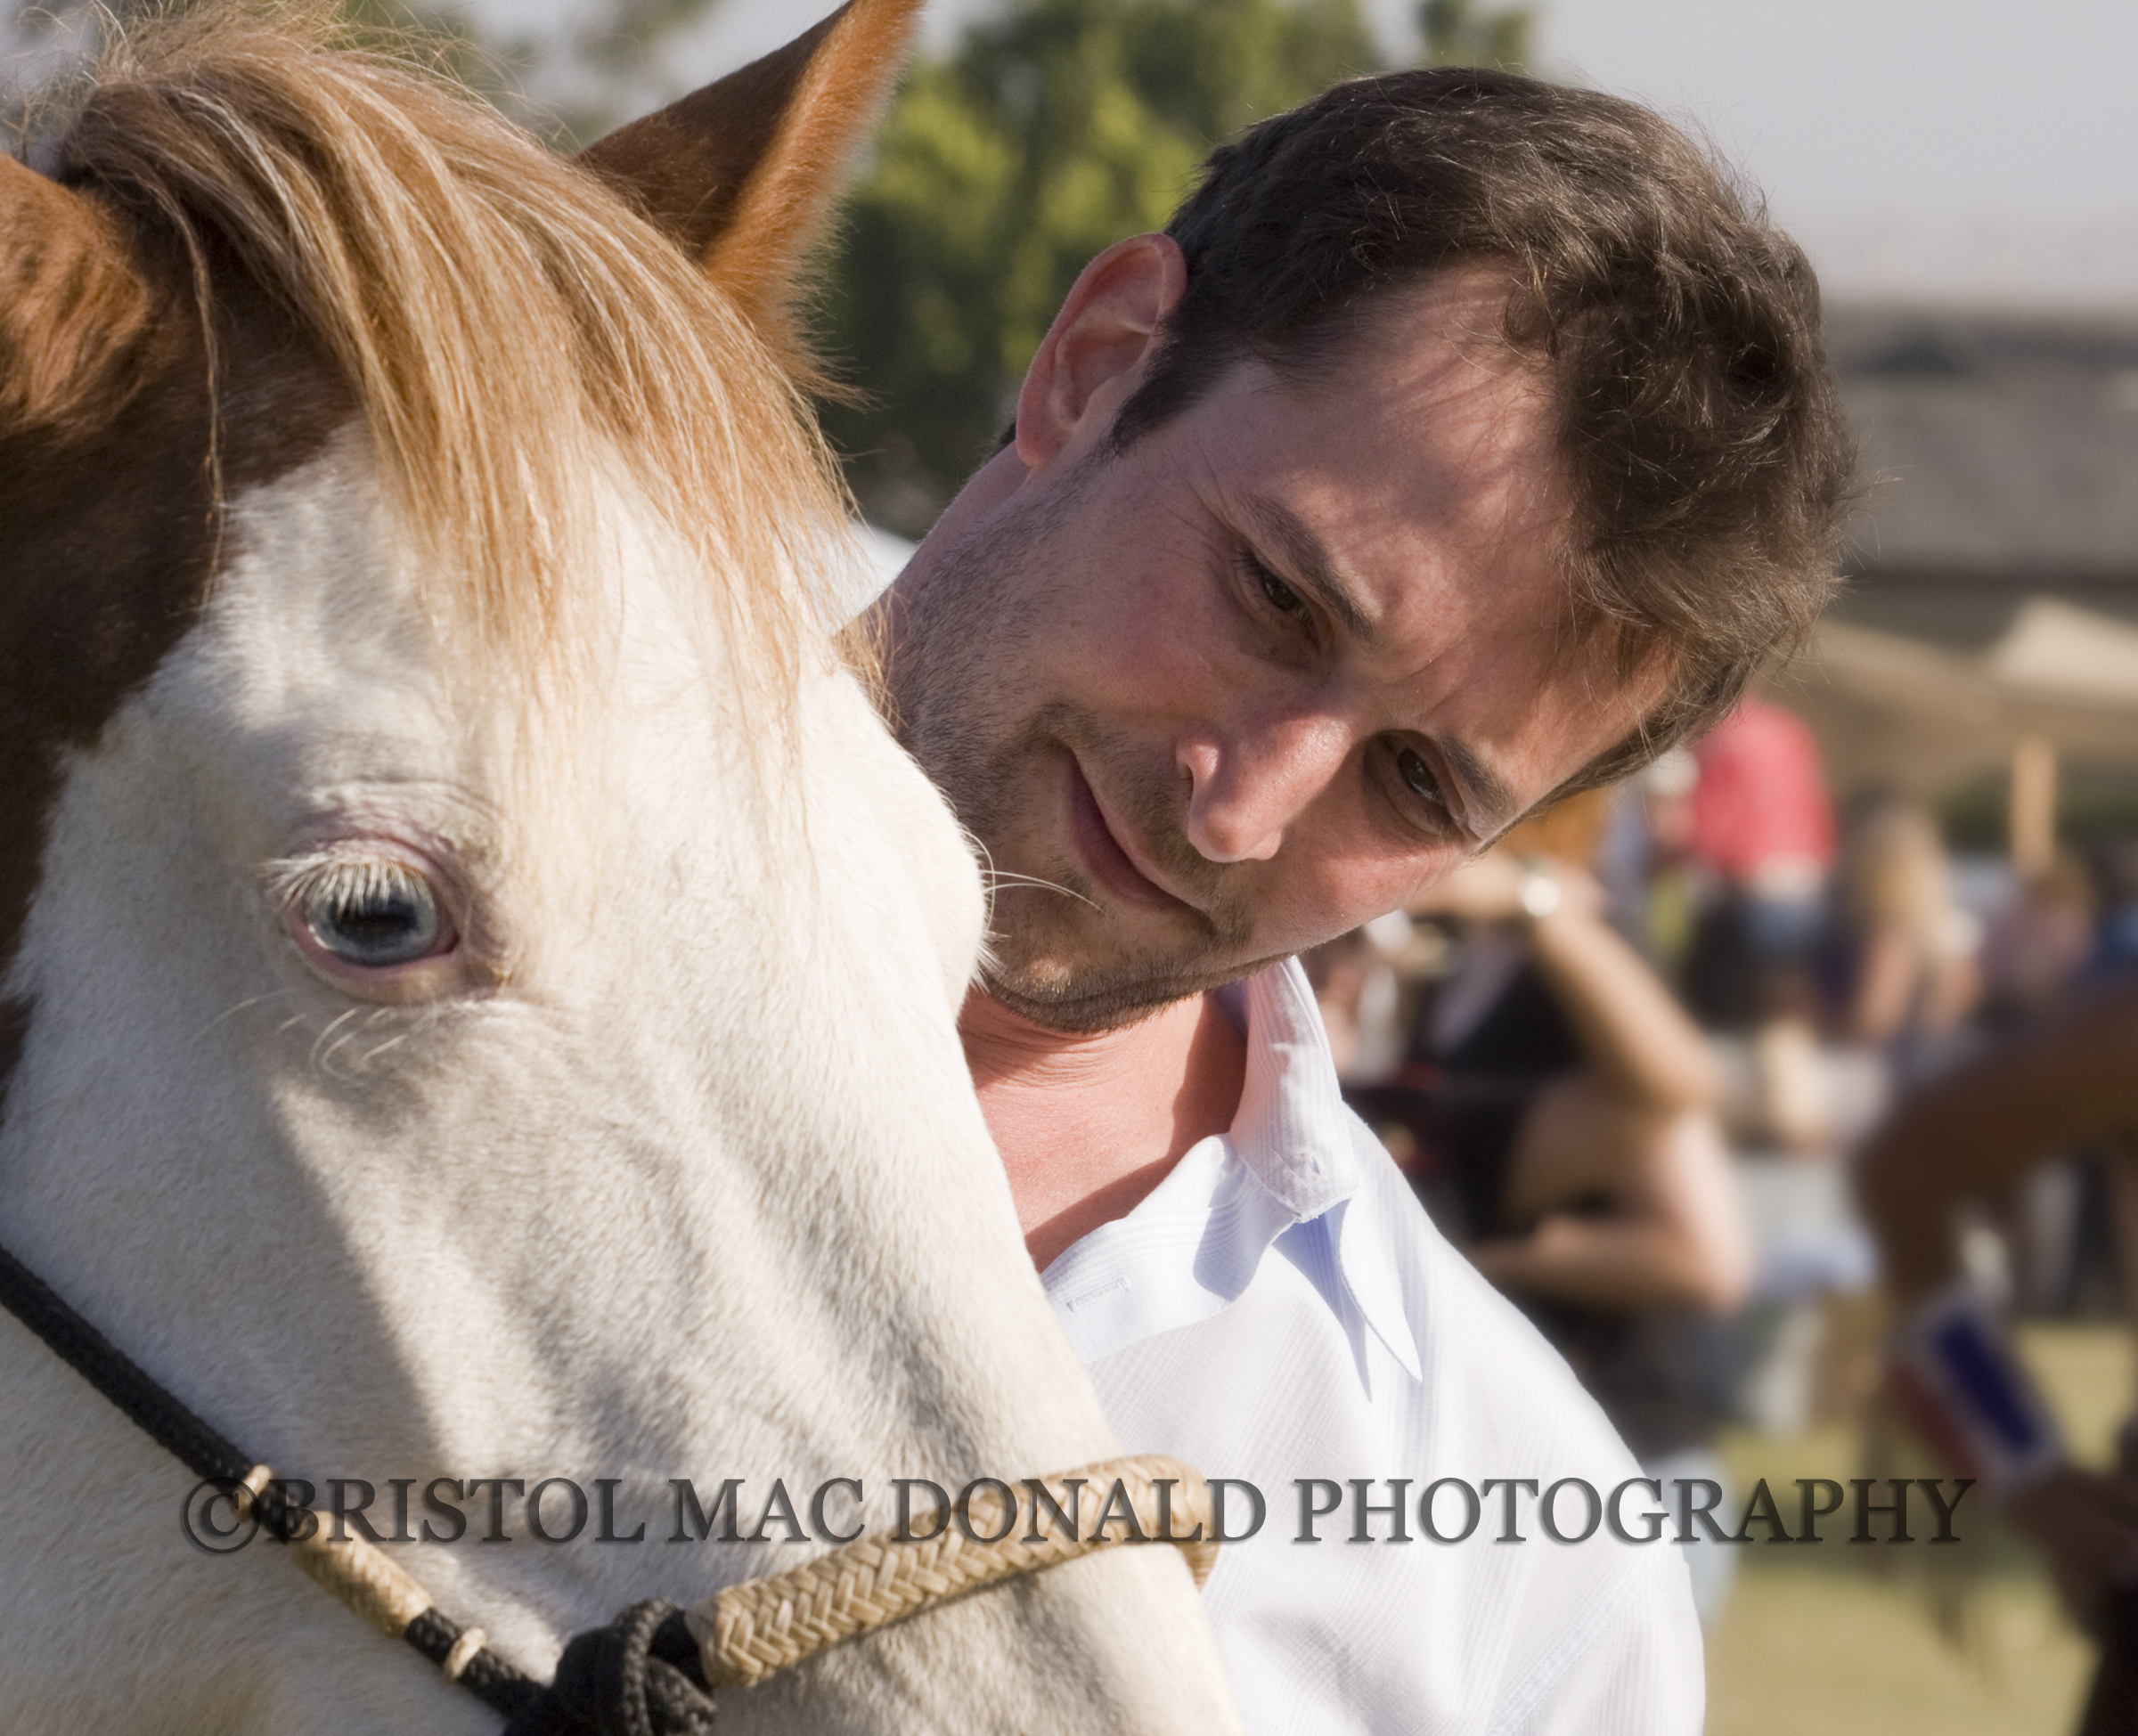 Noah Wyle with Isadora Cruce at the Spirit of the Horse Event in Santa Barbara, 2008